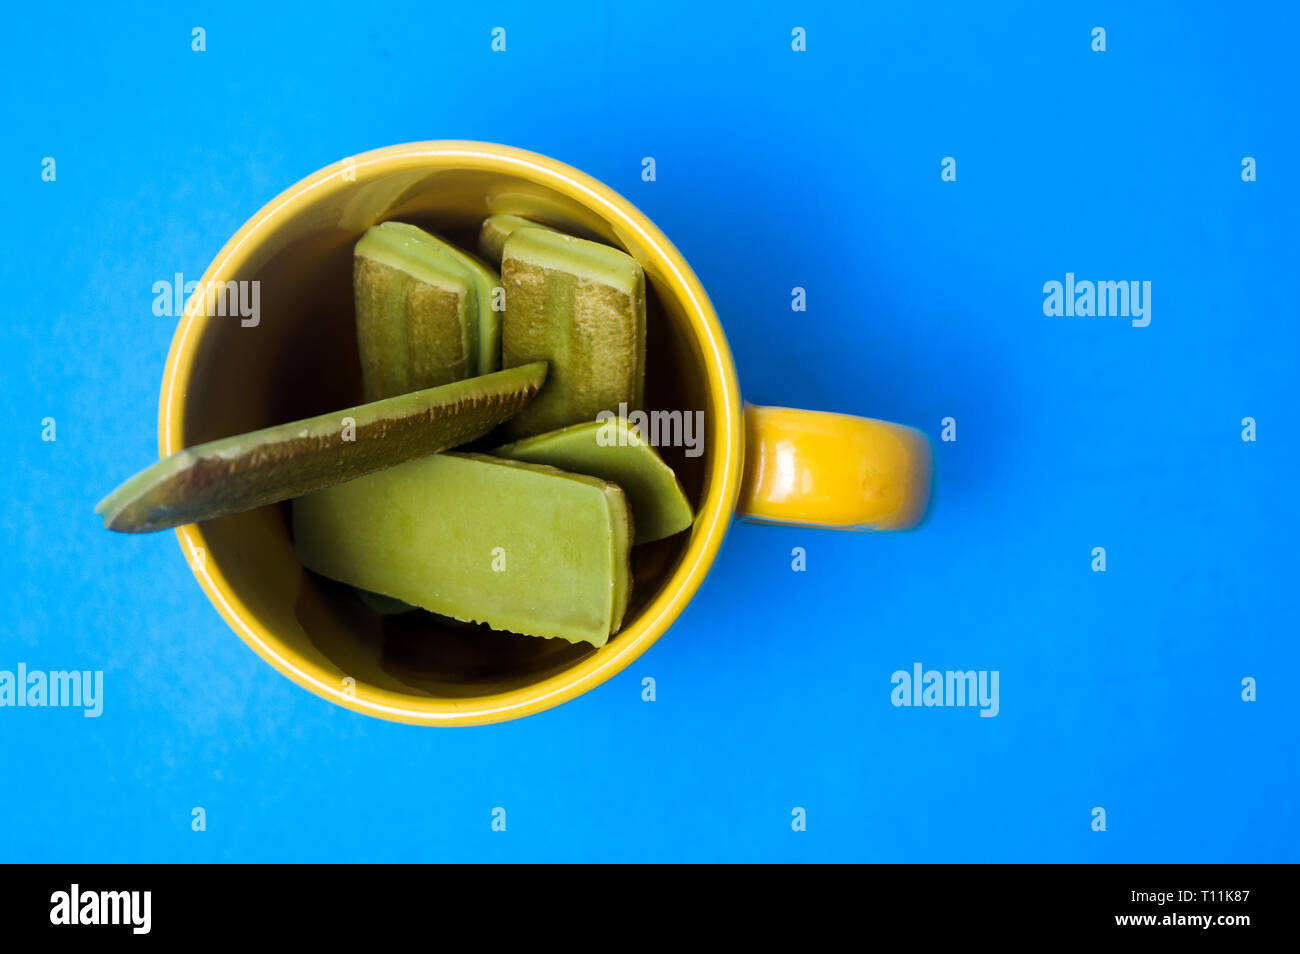 Matcha green tea flavored biscuits on colorful background Stock Photo